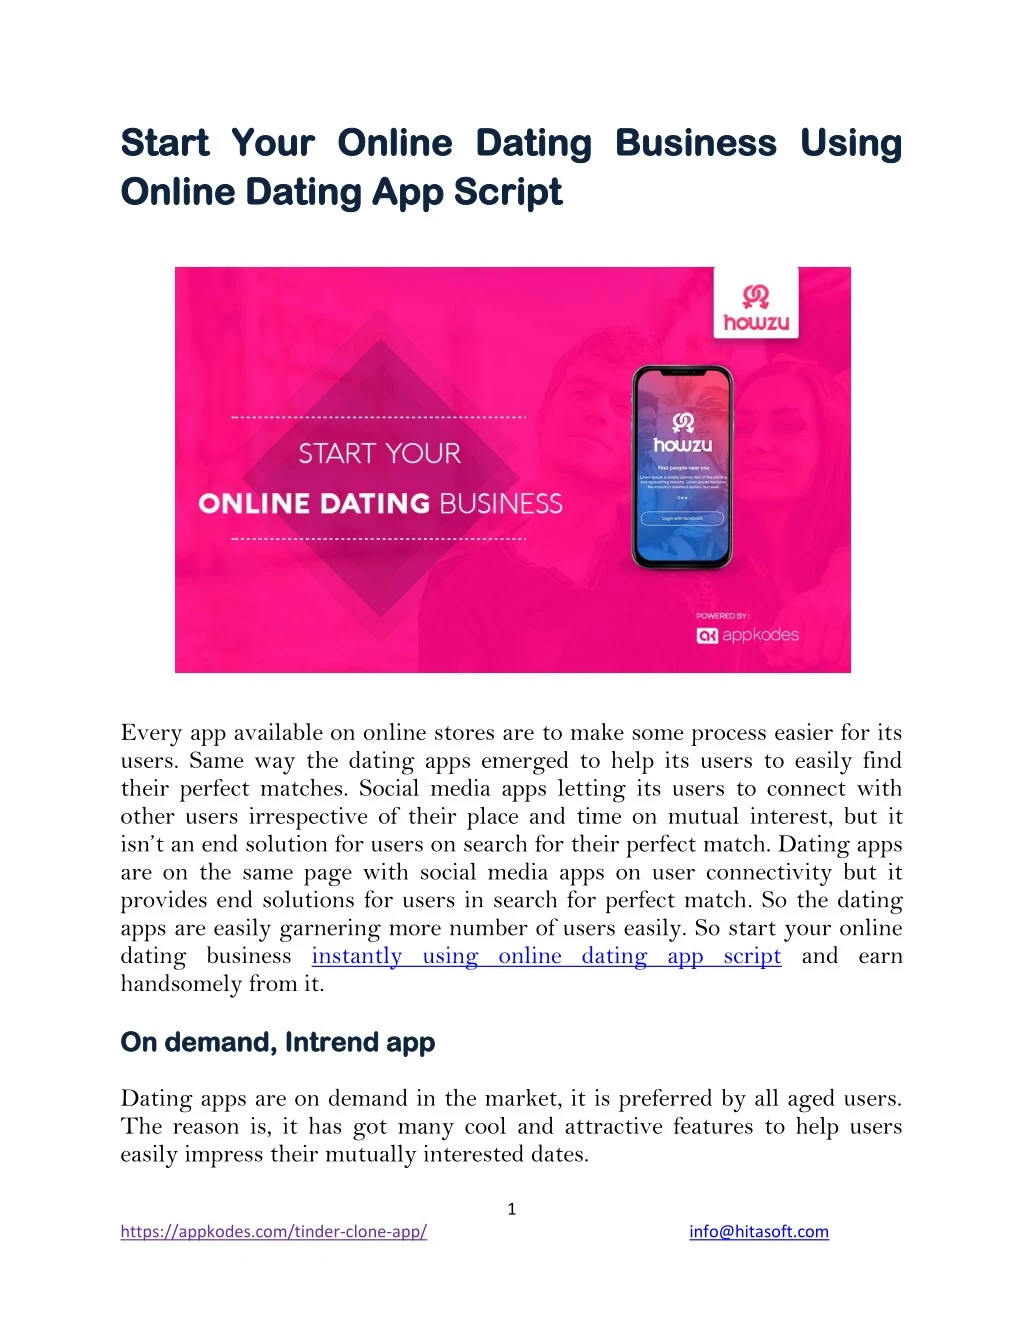 Which is the best dating app for Android? - Quora